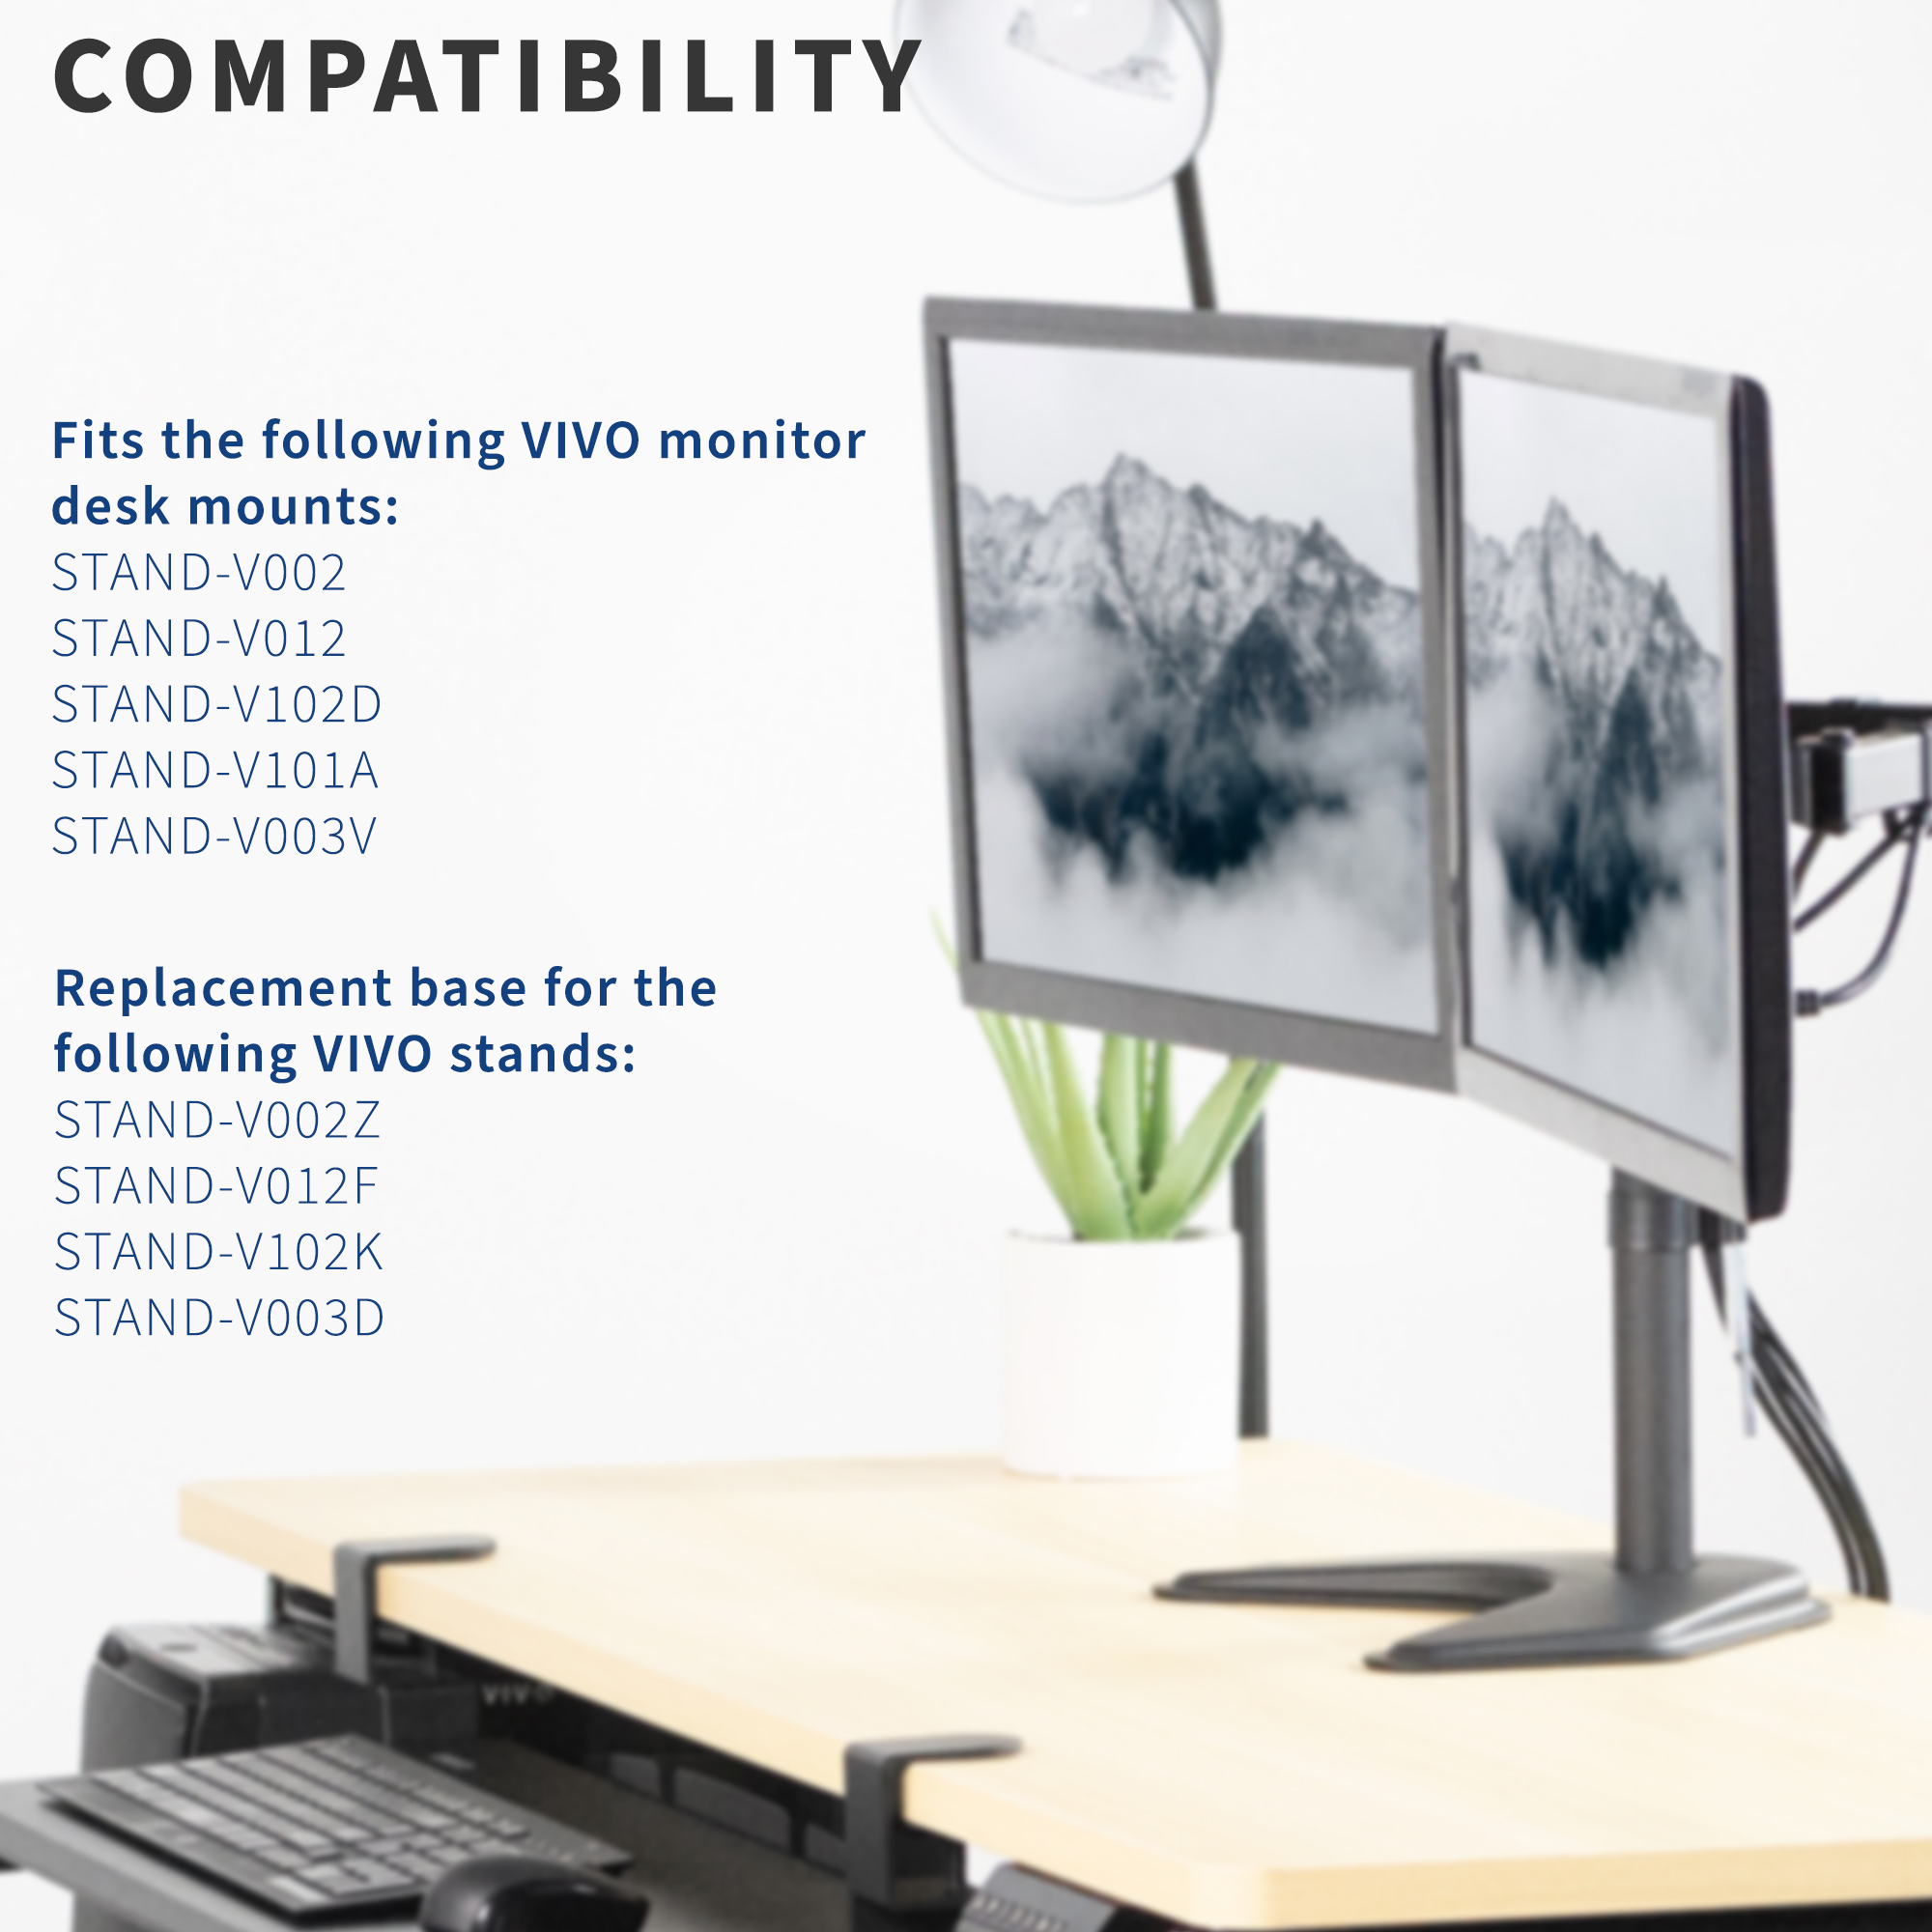 VIVO Freestanding Base for Monitor Desk Stand, 13" x 11" Platform with Padding - image 3 of 6